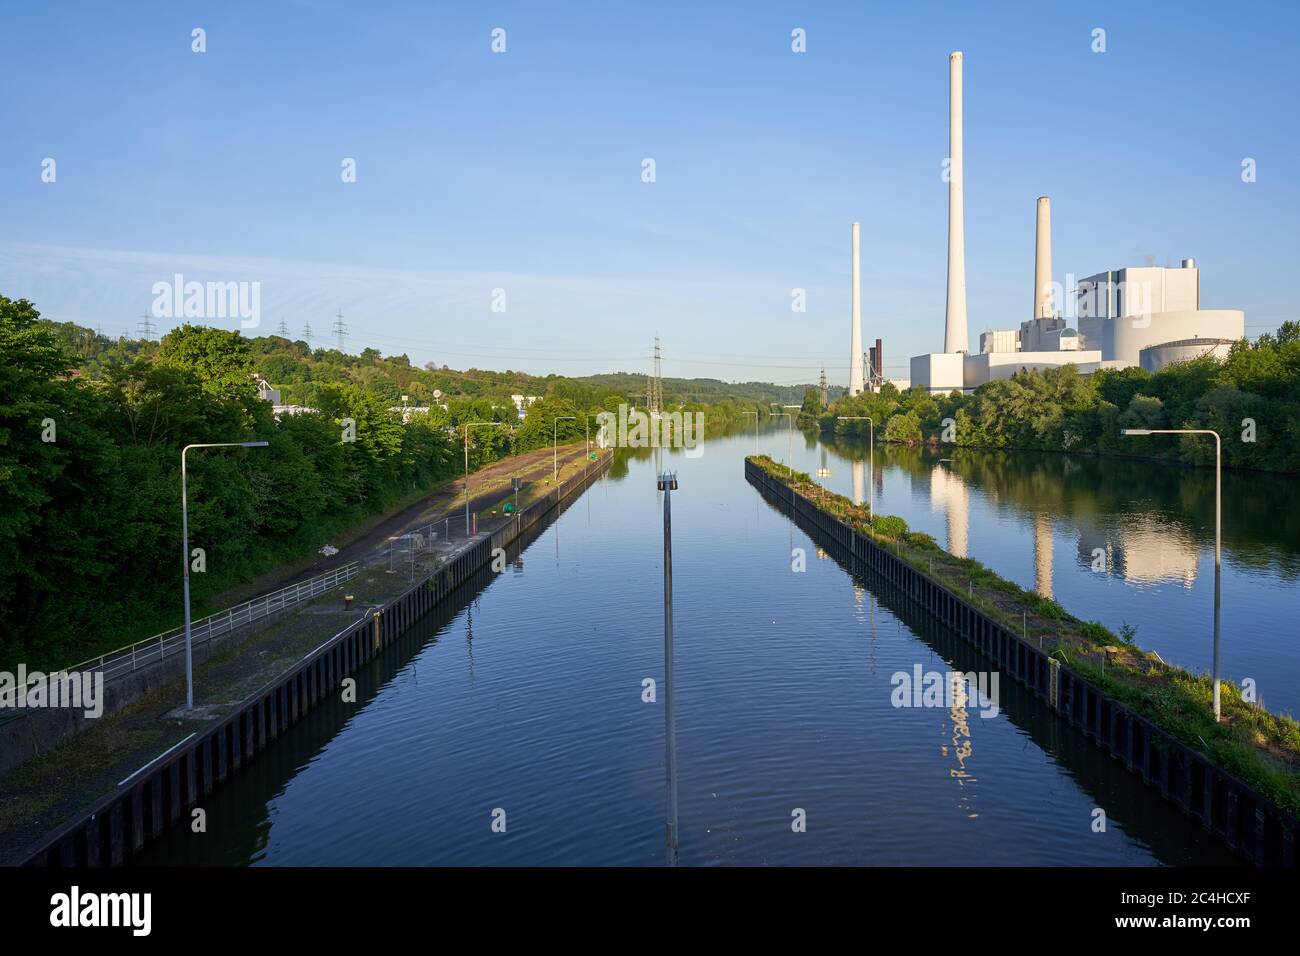 Altbach, Germany - May 08, 2020: The Altbach / Deizisau thermal power station is a hard coal-fired power station in Baden-Wuerttemberg. Stock Photo